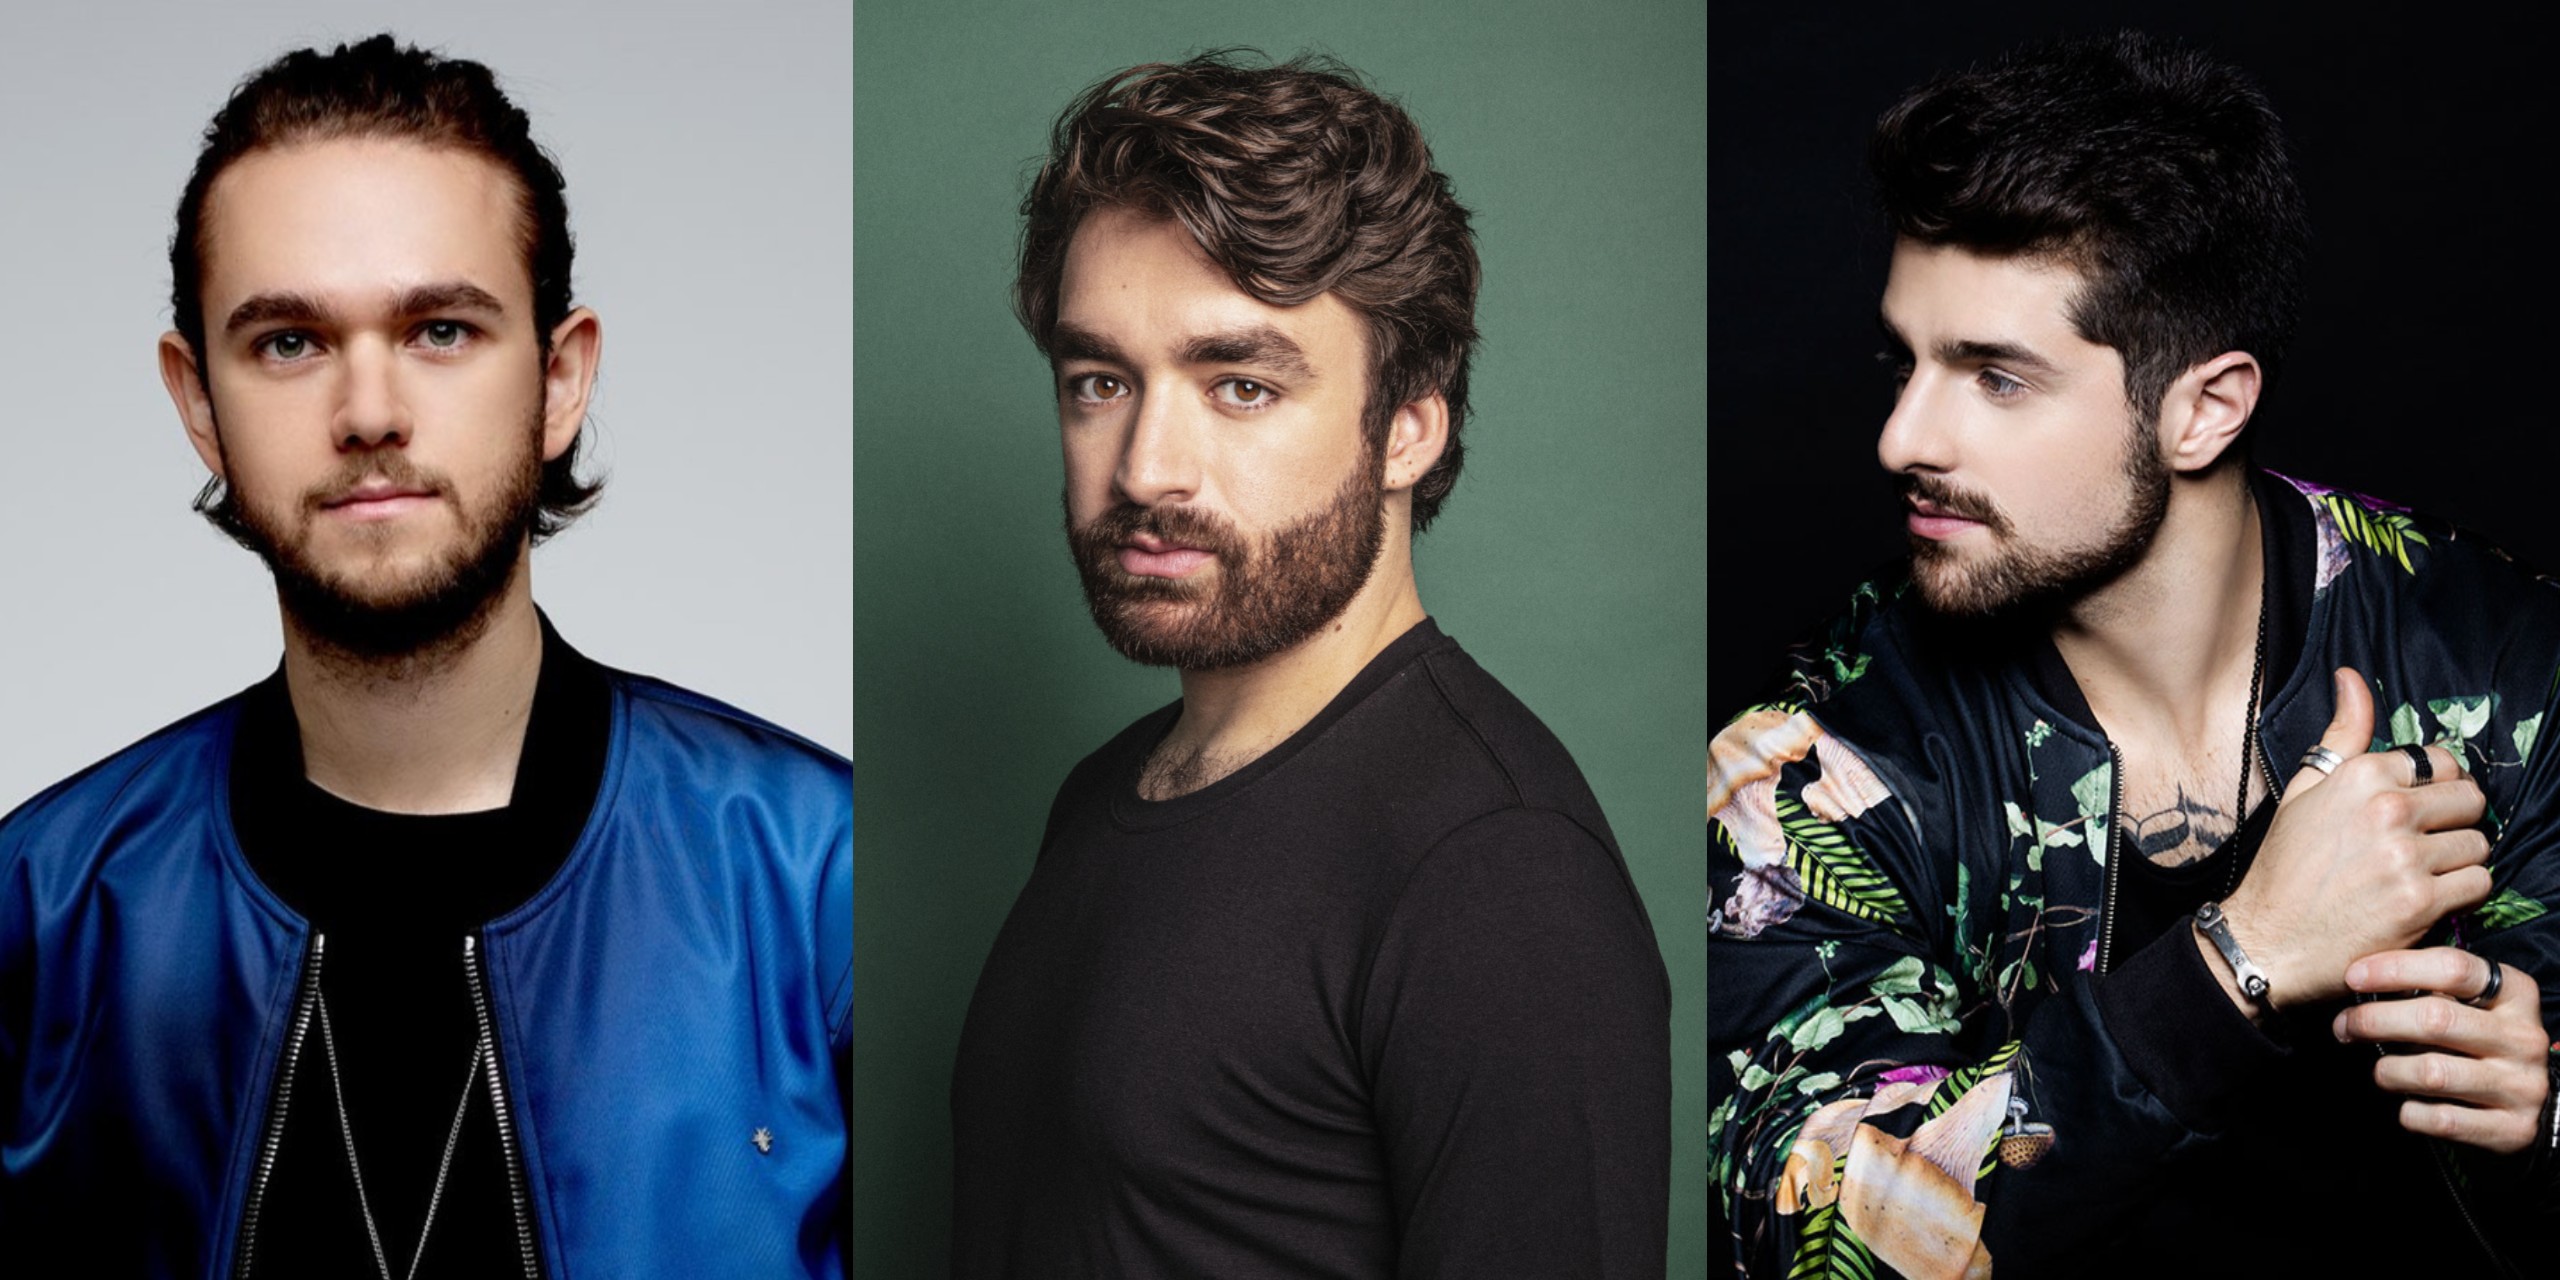 Legacy Music Festival announces 2nd wave line-up – Zedd, Oliver Heldens, Alok and more to perform 